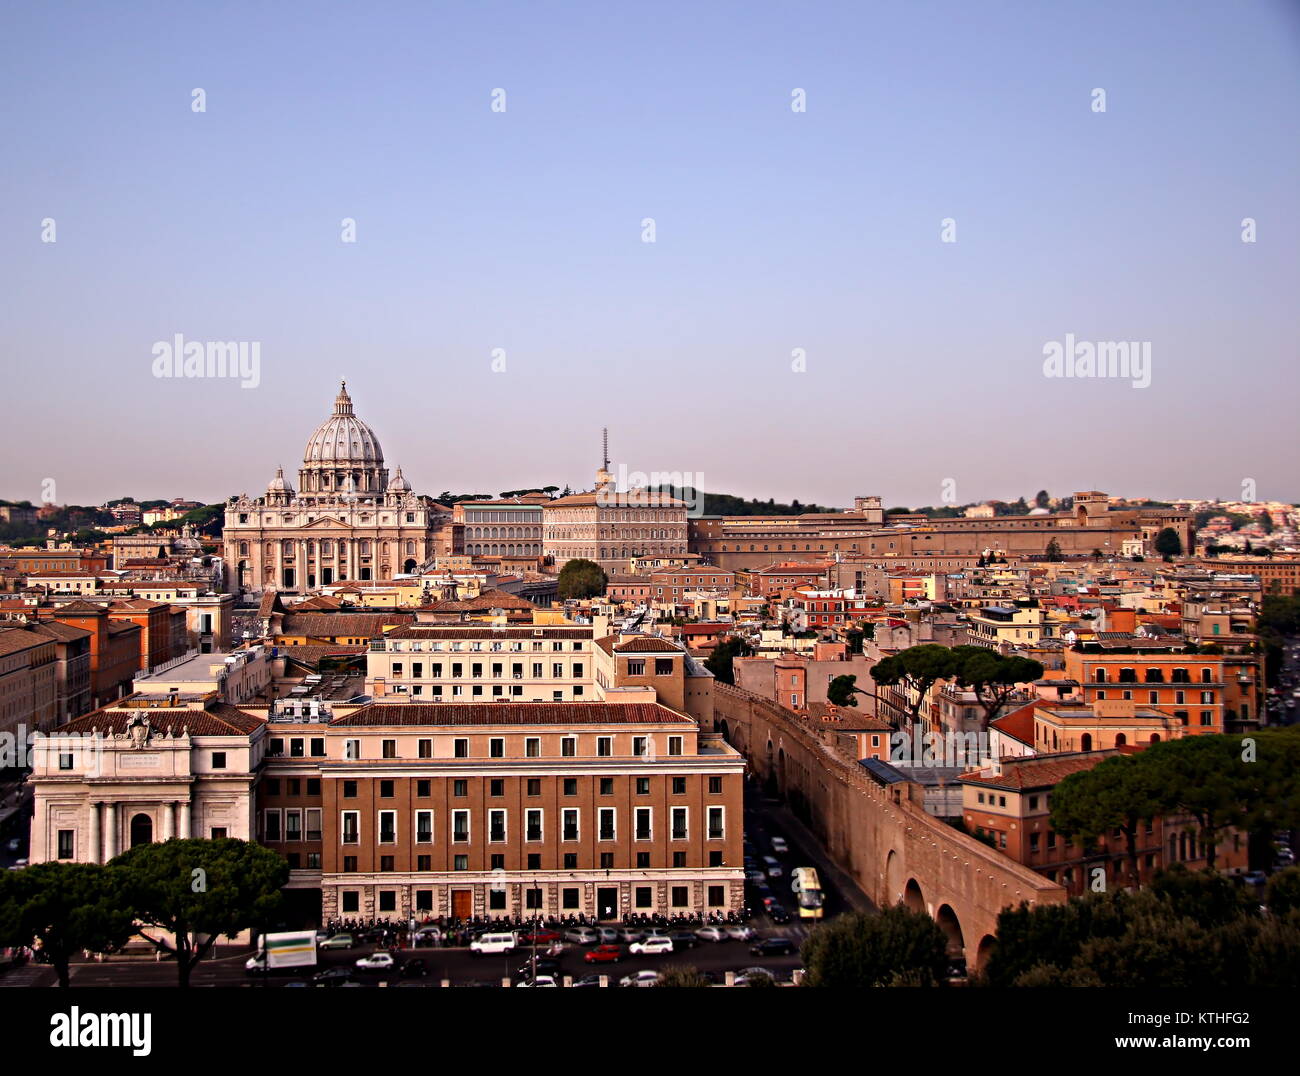 Panoramic of the Vatican city, rome, with the Papal Basilica of St. Peter in the Vatican (St. Peter's Basilica), on the background. Stock Photo